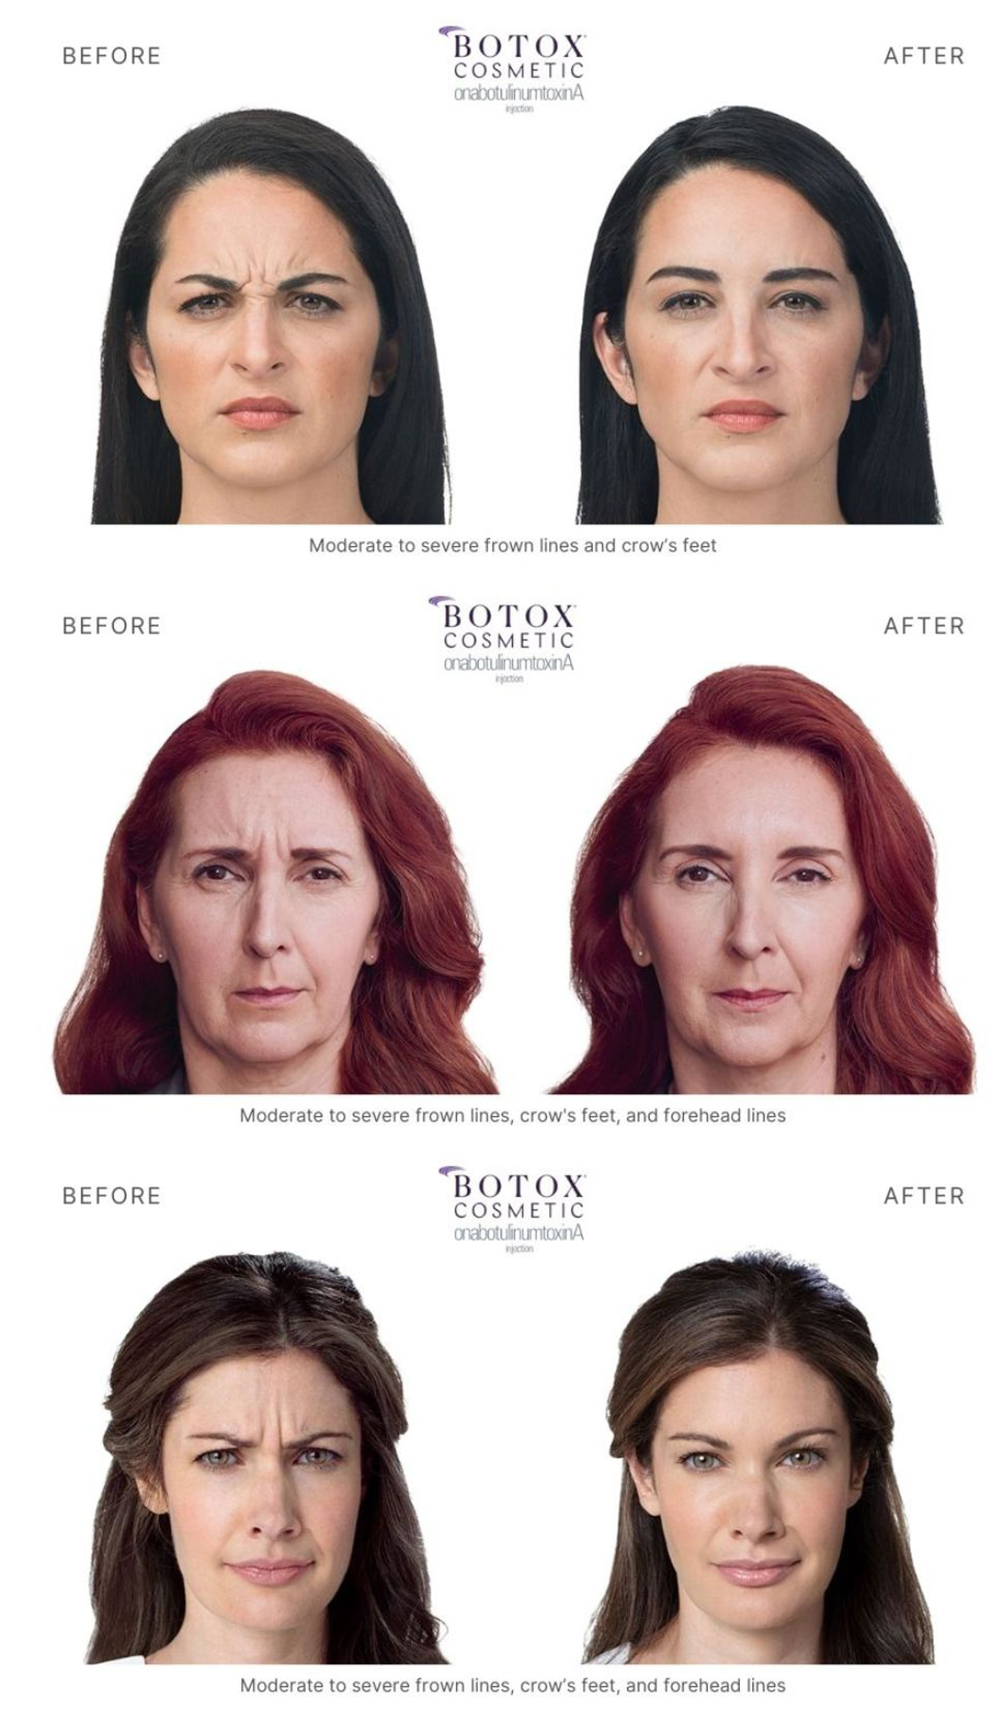 Three women with expression lines before and relaxed facial features after botox.